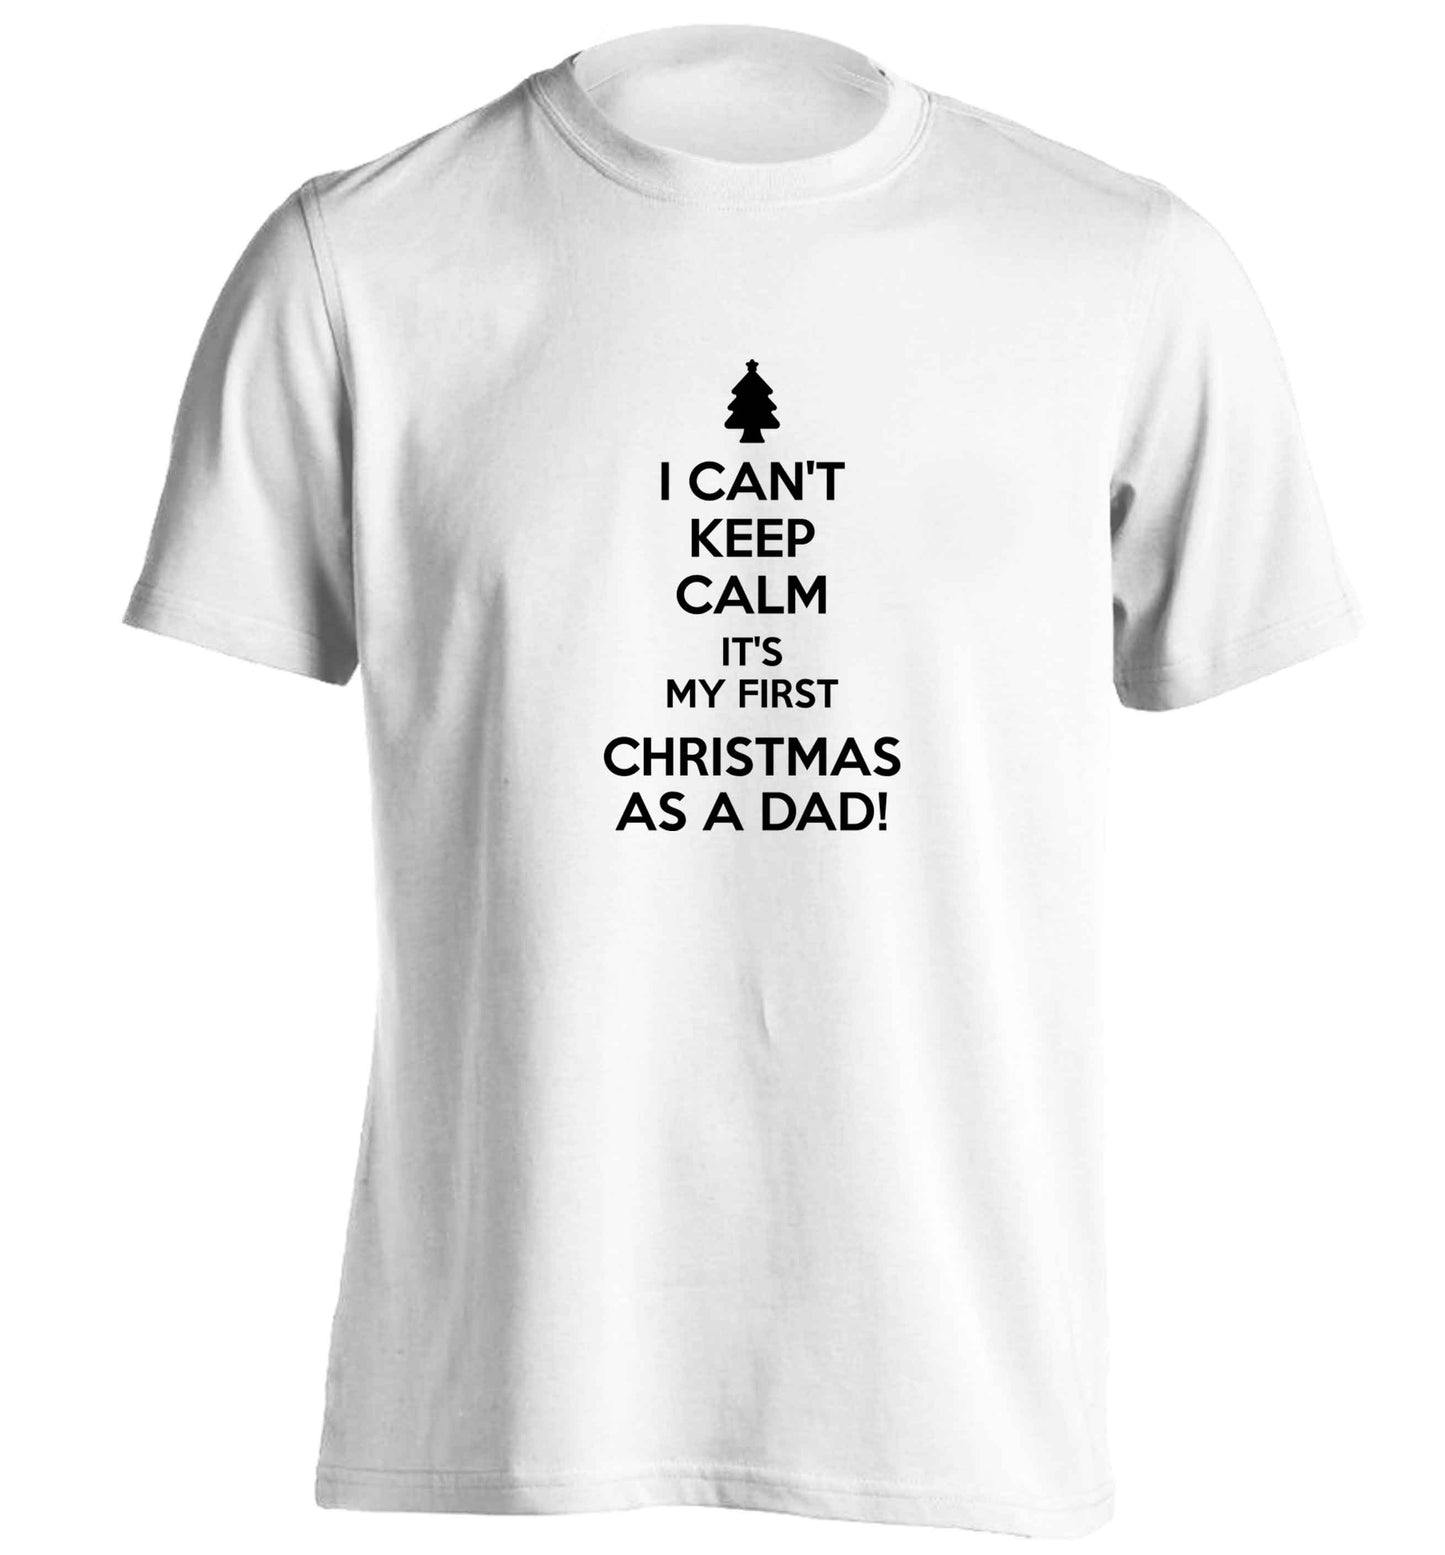 I can't keep calm it's my first Christmas as a dad adults unisex white Tshirt 2XL